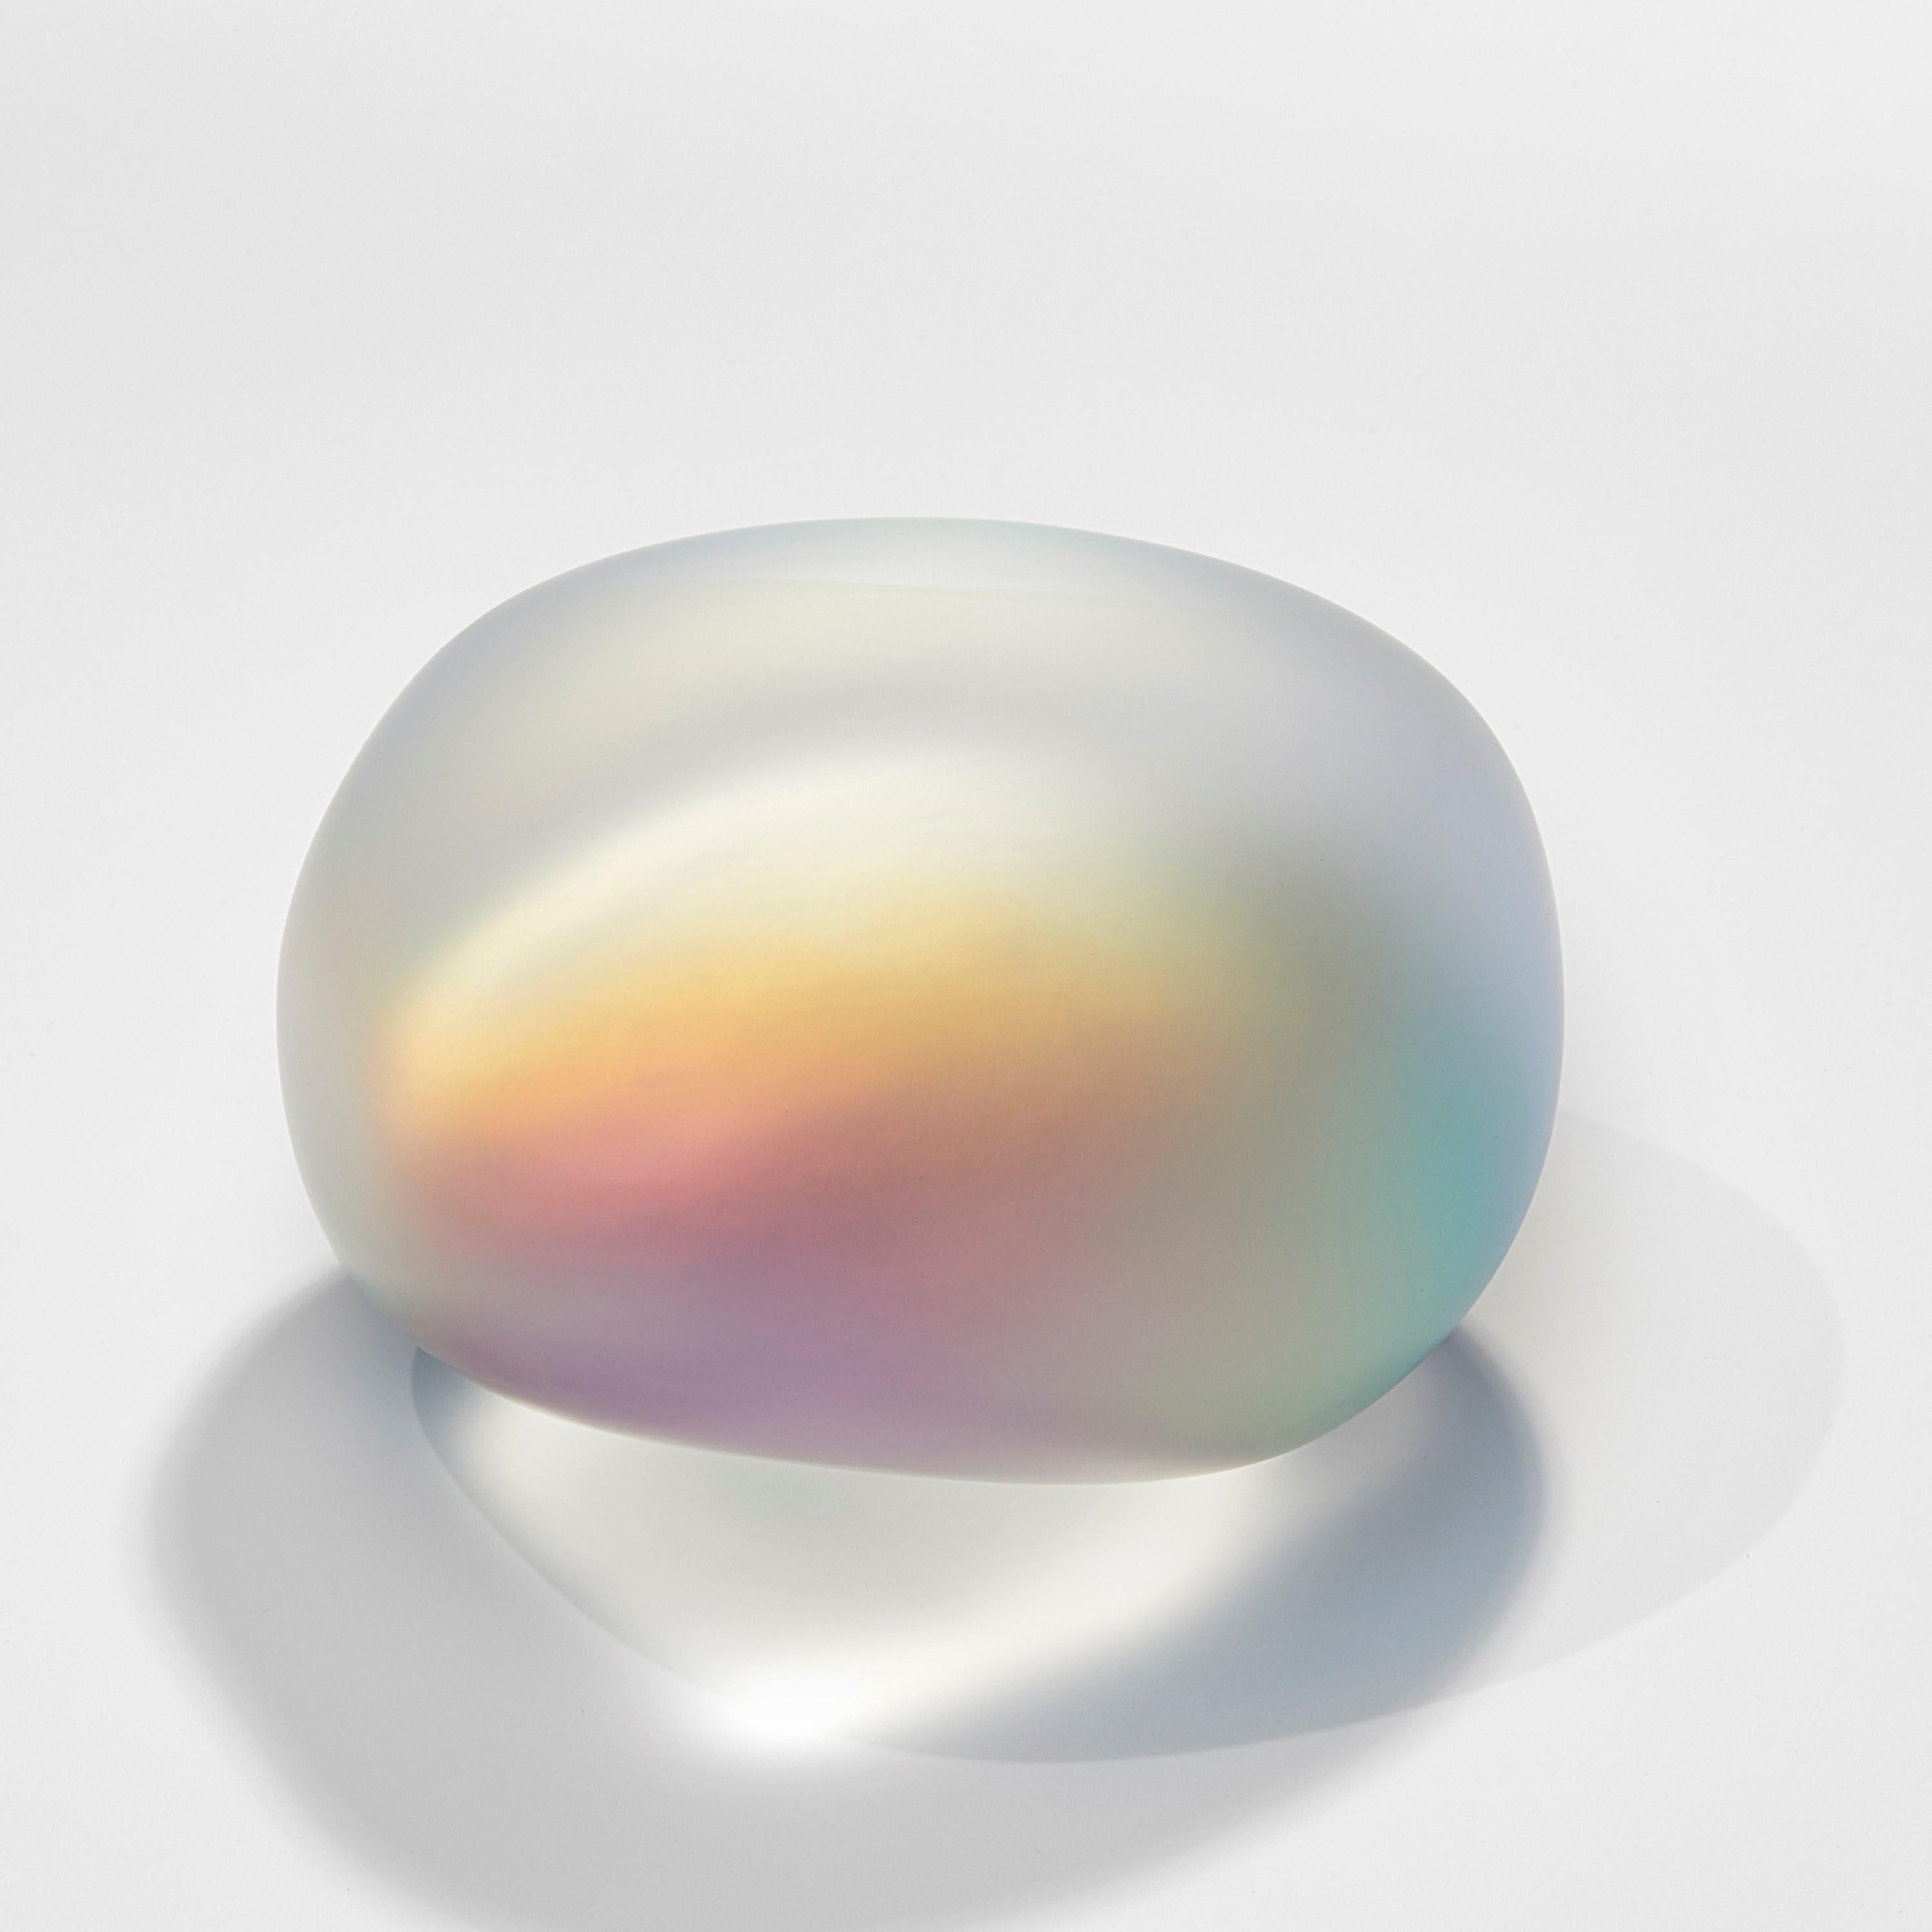 'Moon-rock 011' is a unique sculpture by the British artist, Jon Lewis, created from cast glass with dichroic filters. 

Lewis’ first introduction to glassmaking was in 1989 at Wolverhampton University, where he instantly fell in love with glass as